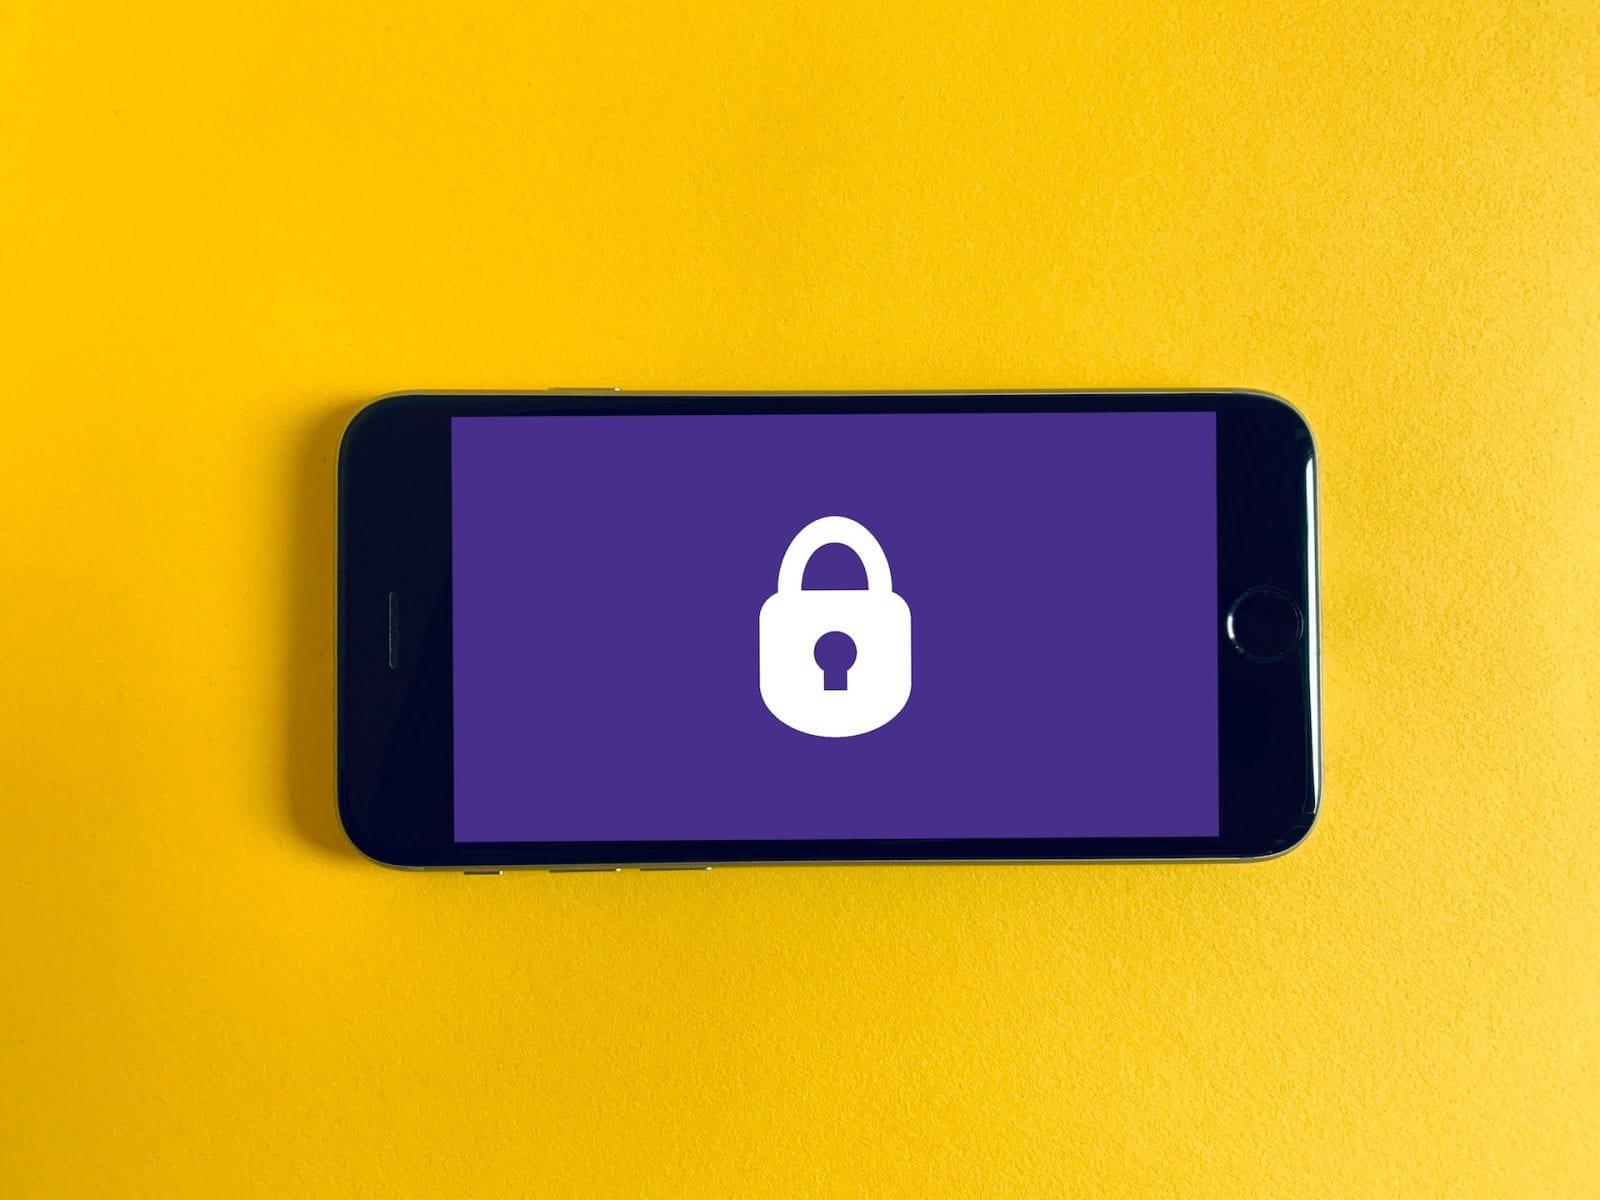 lock icon on a cell phone